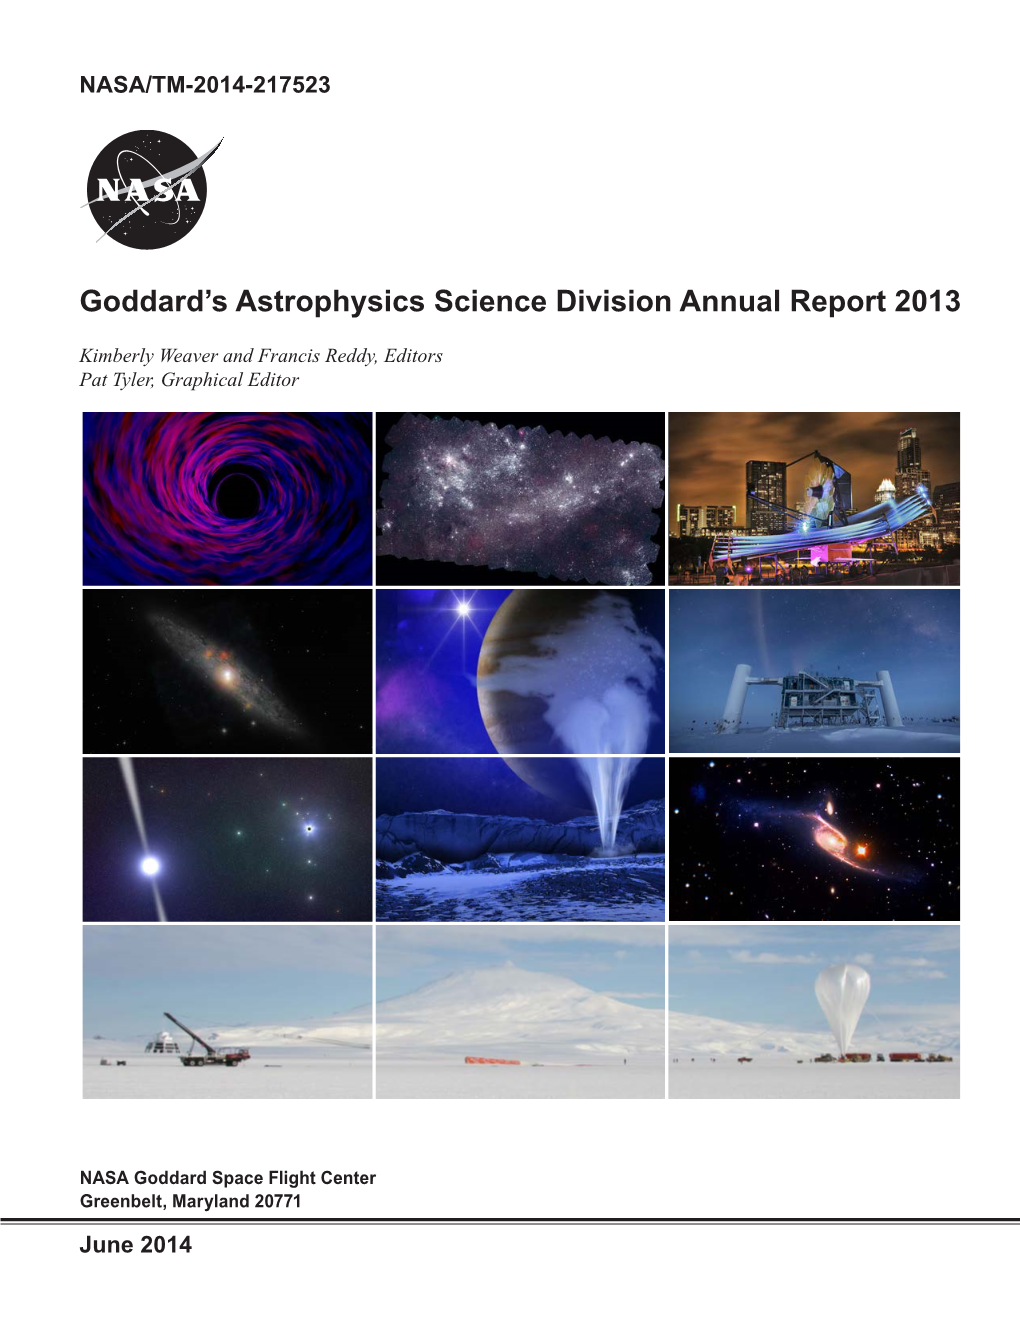 Astrophysics Science Division (ASD) Annual Report 2013